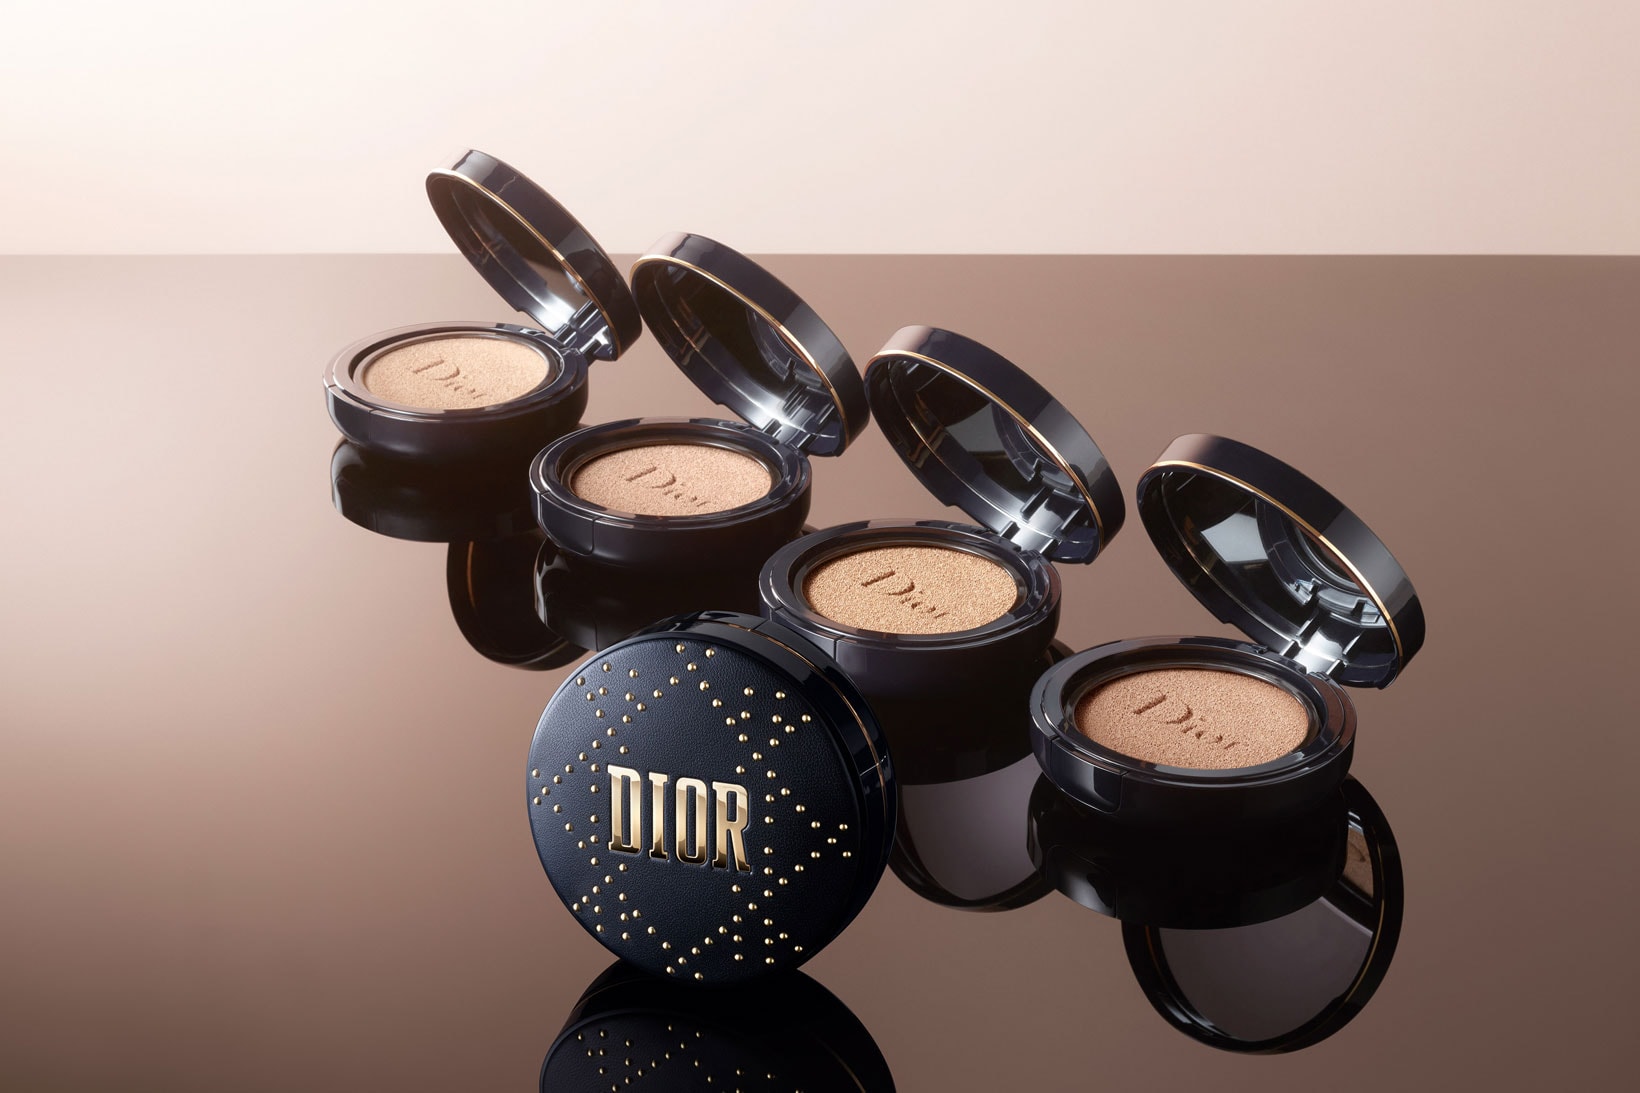 Dior Beauty Forever Skin Glow Foundation Cushion